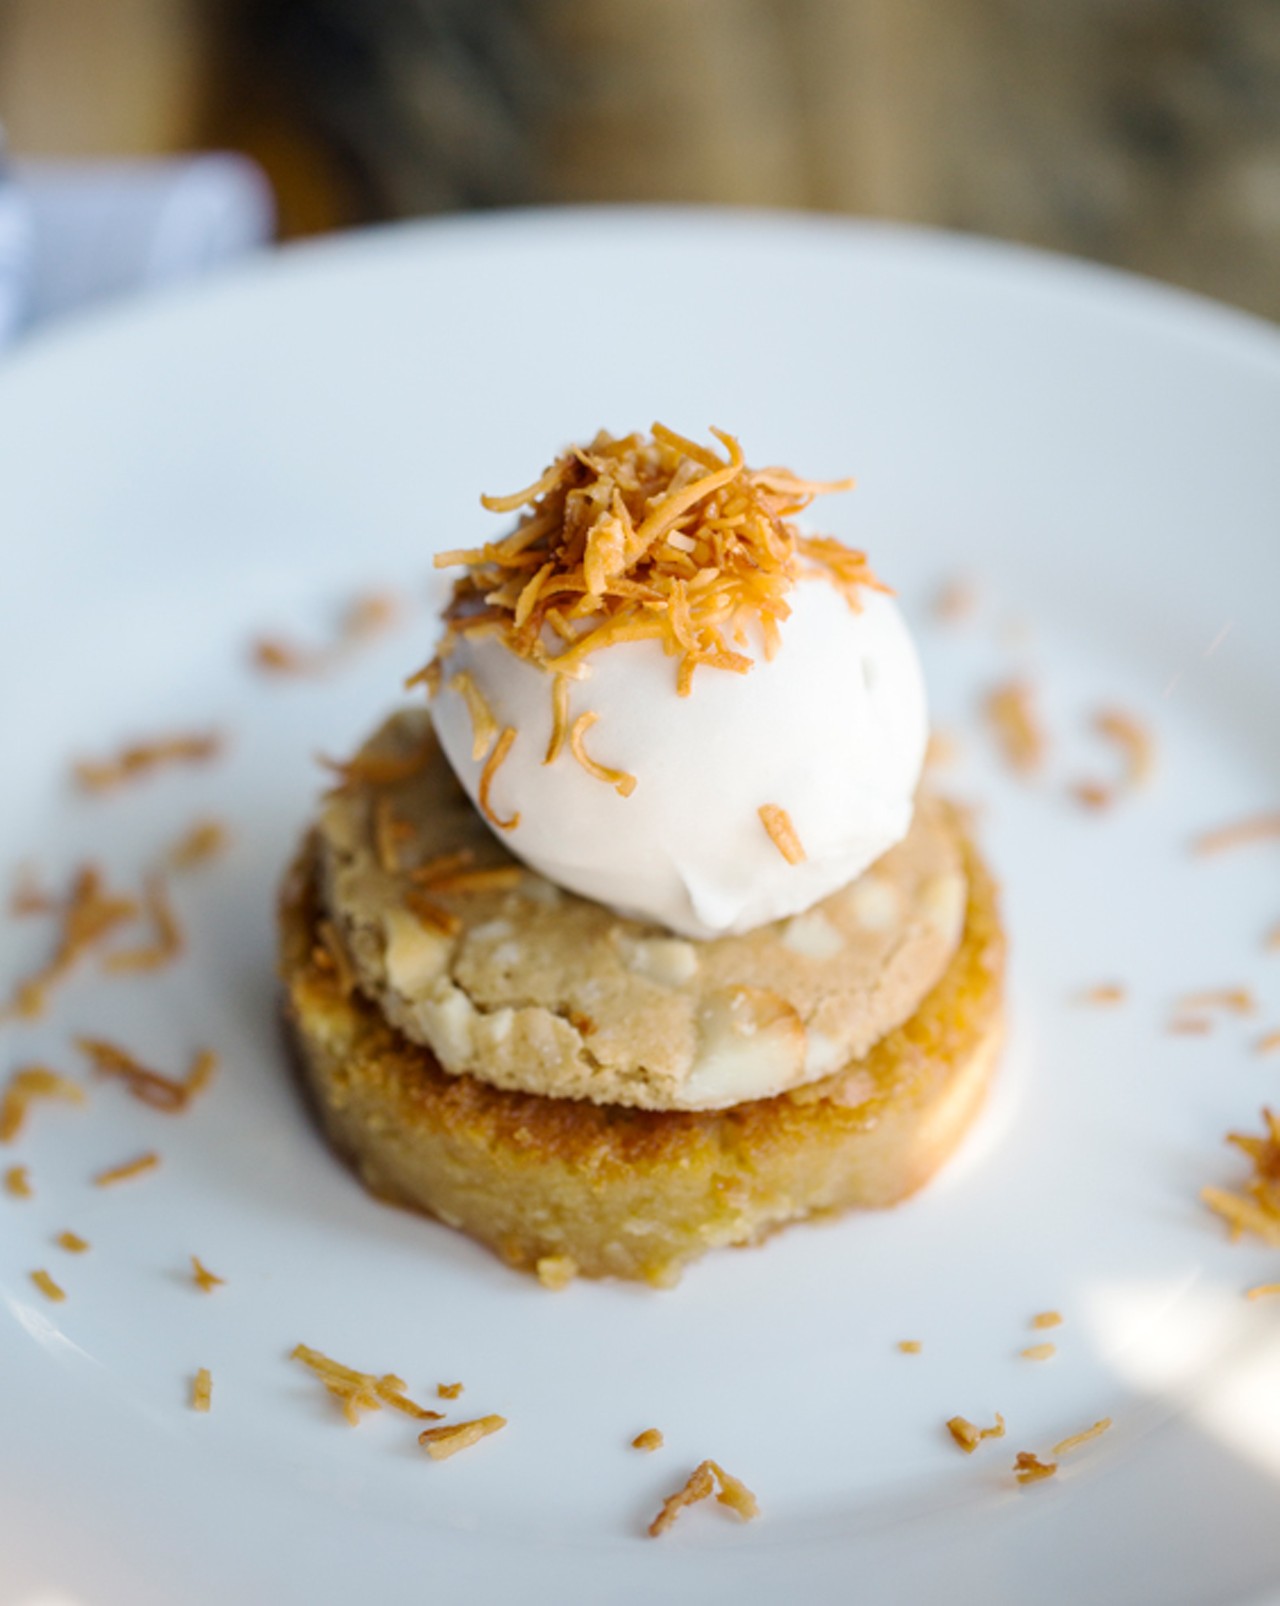 The Libertine's blondie with coconut sorbet and macadamia nut tuile.